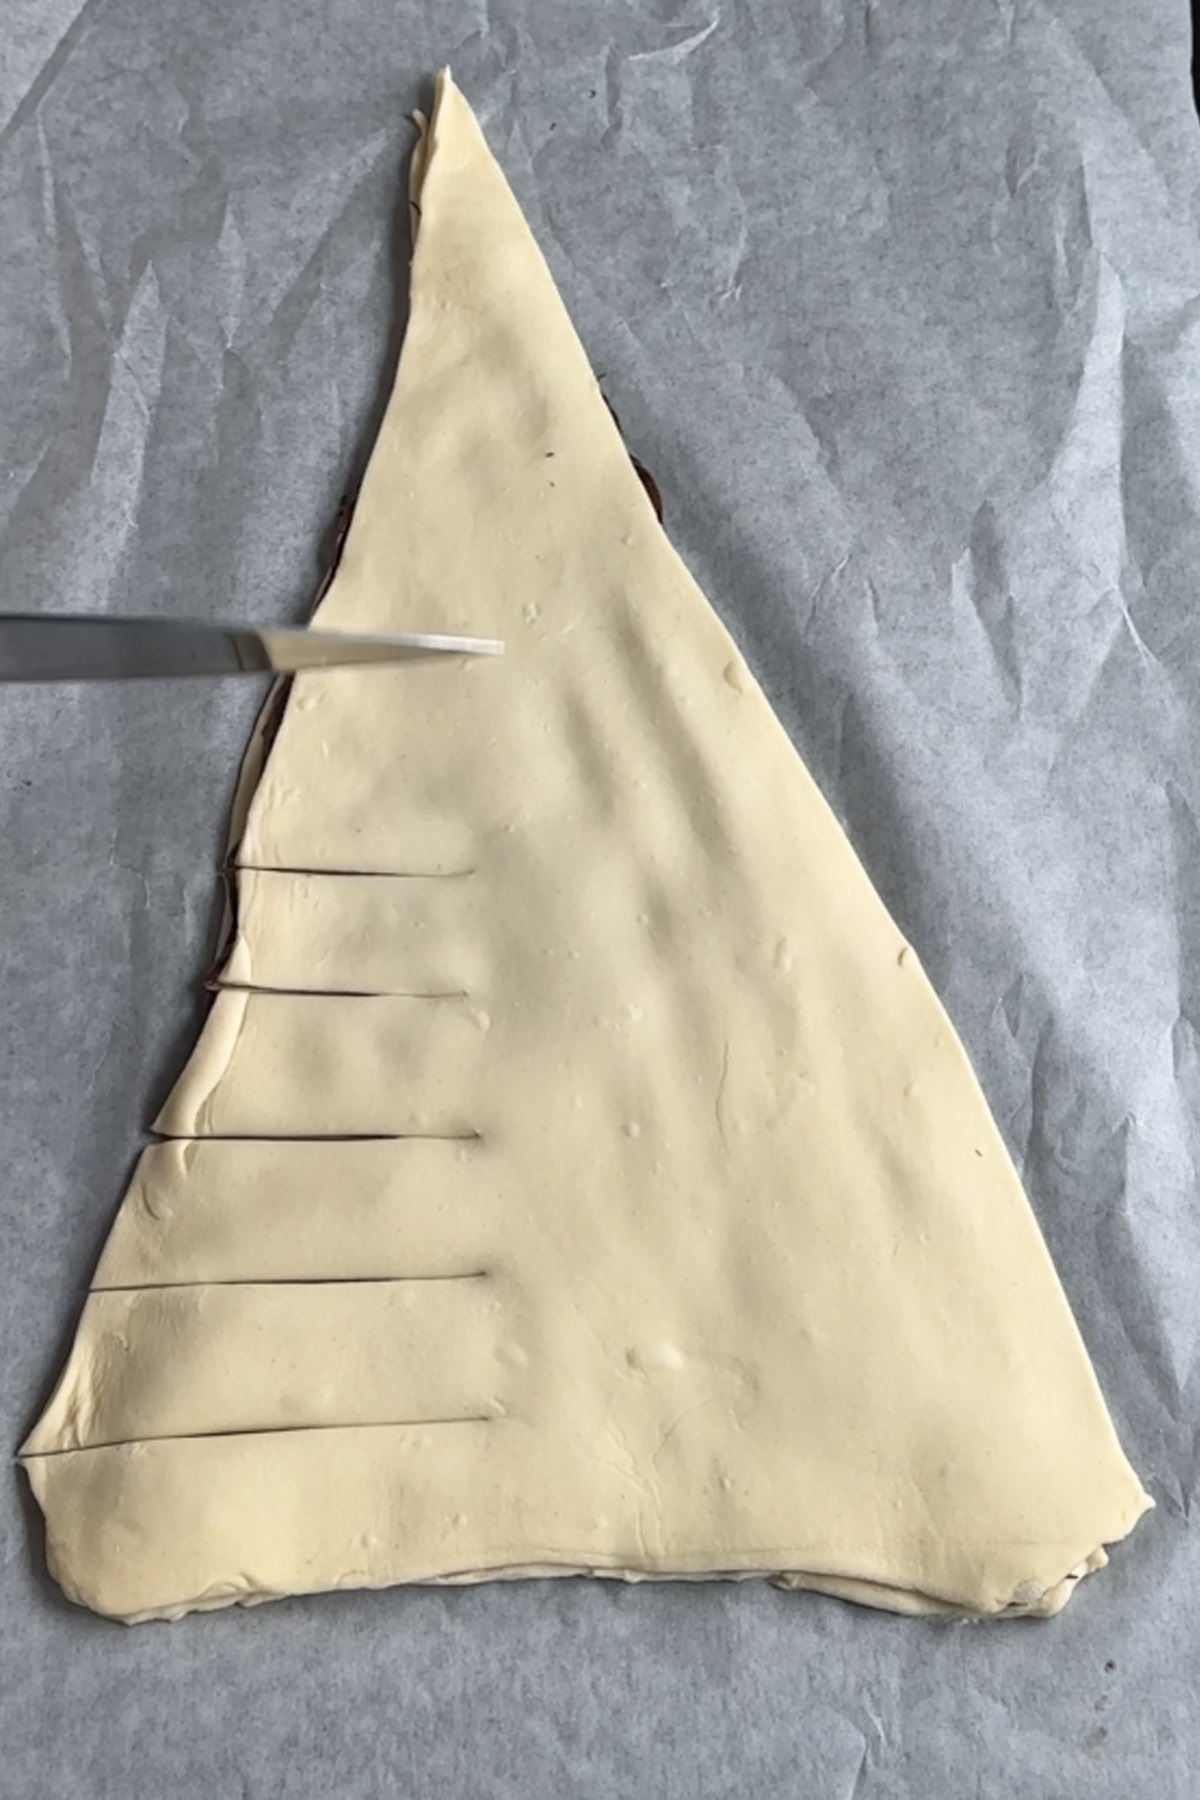 Branches are cut into a triangle of puff pastry for a tree-shaped dessert.